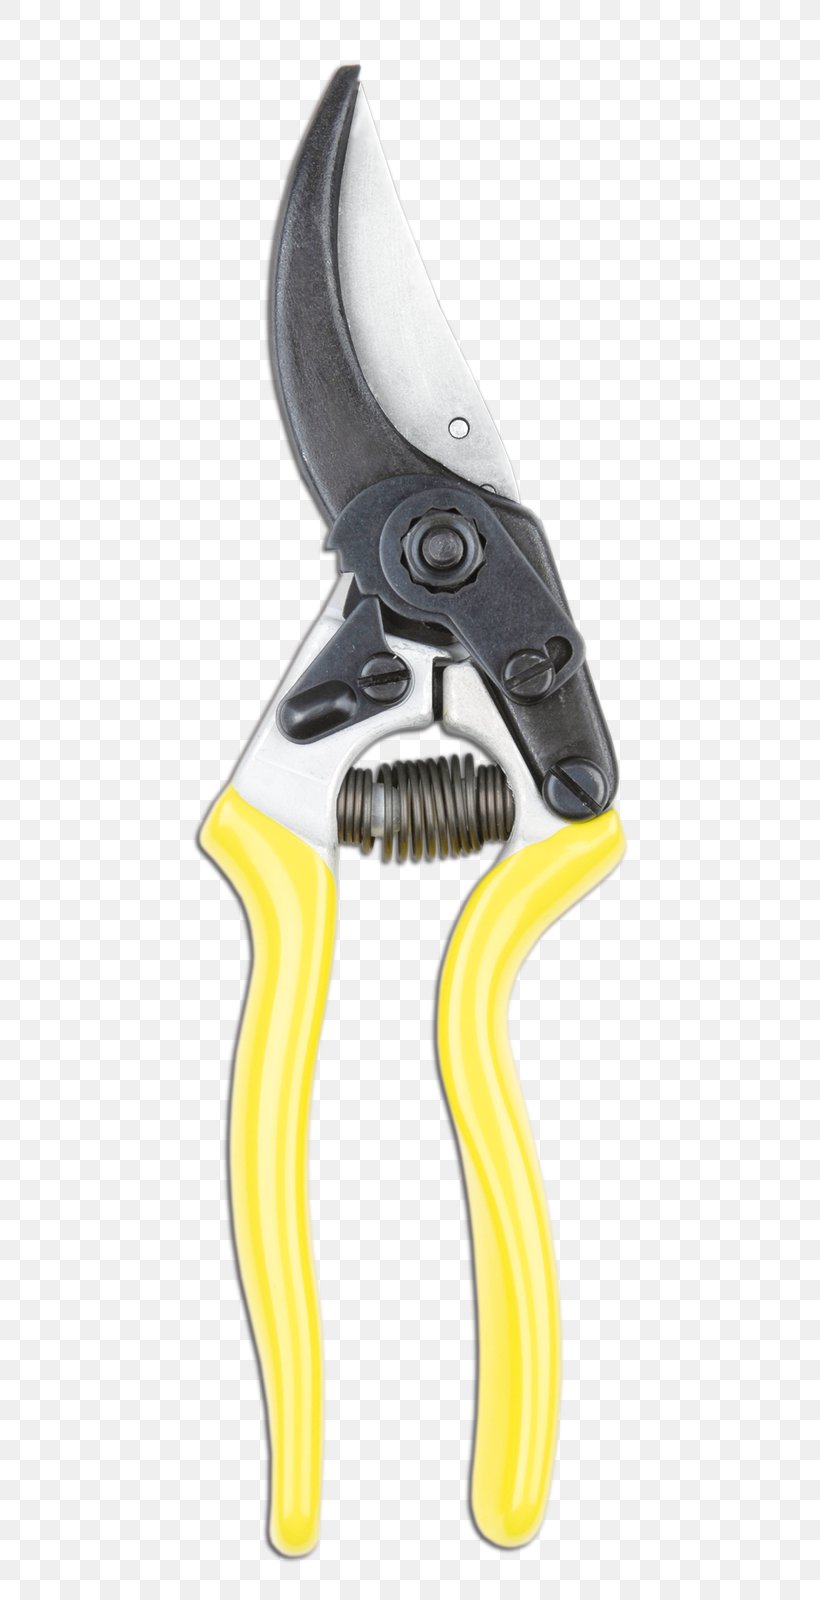 Diagonal Pliers Home Maintenance For Dummies Pruning Shears Scissors Booktopia, PNG, 628x1600px, Diagonal Pliers, Booktopia, For Dummies, Fruit Picking, Hardware Download Free